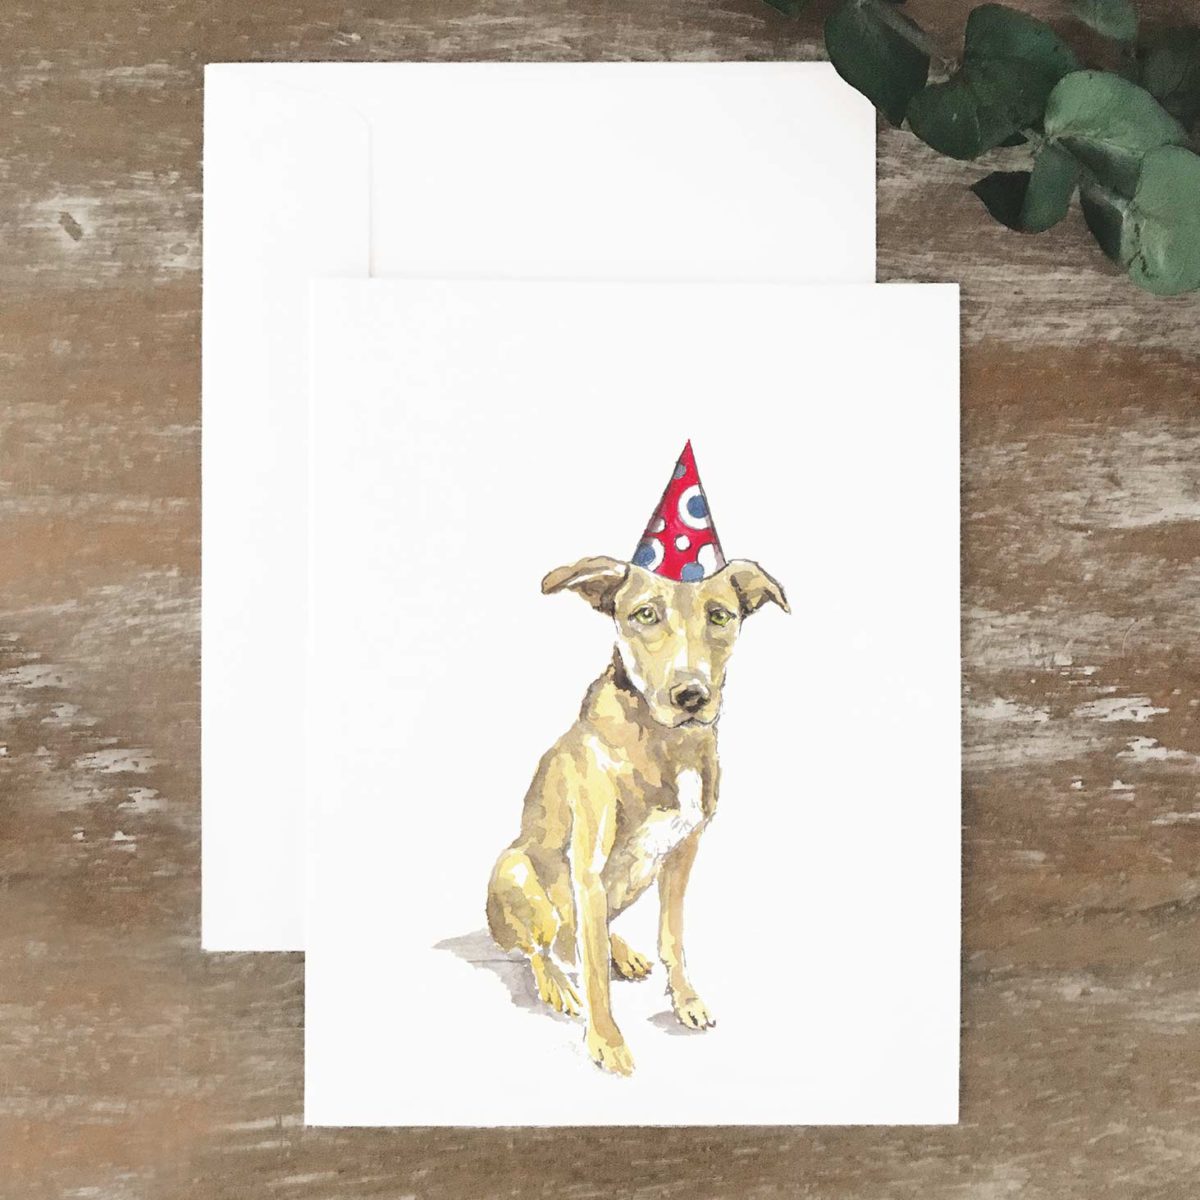 A2 greeting card of a tan dog wearing a party hat